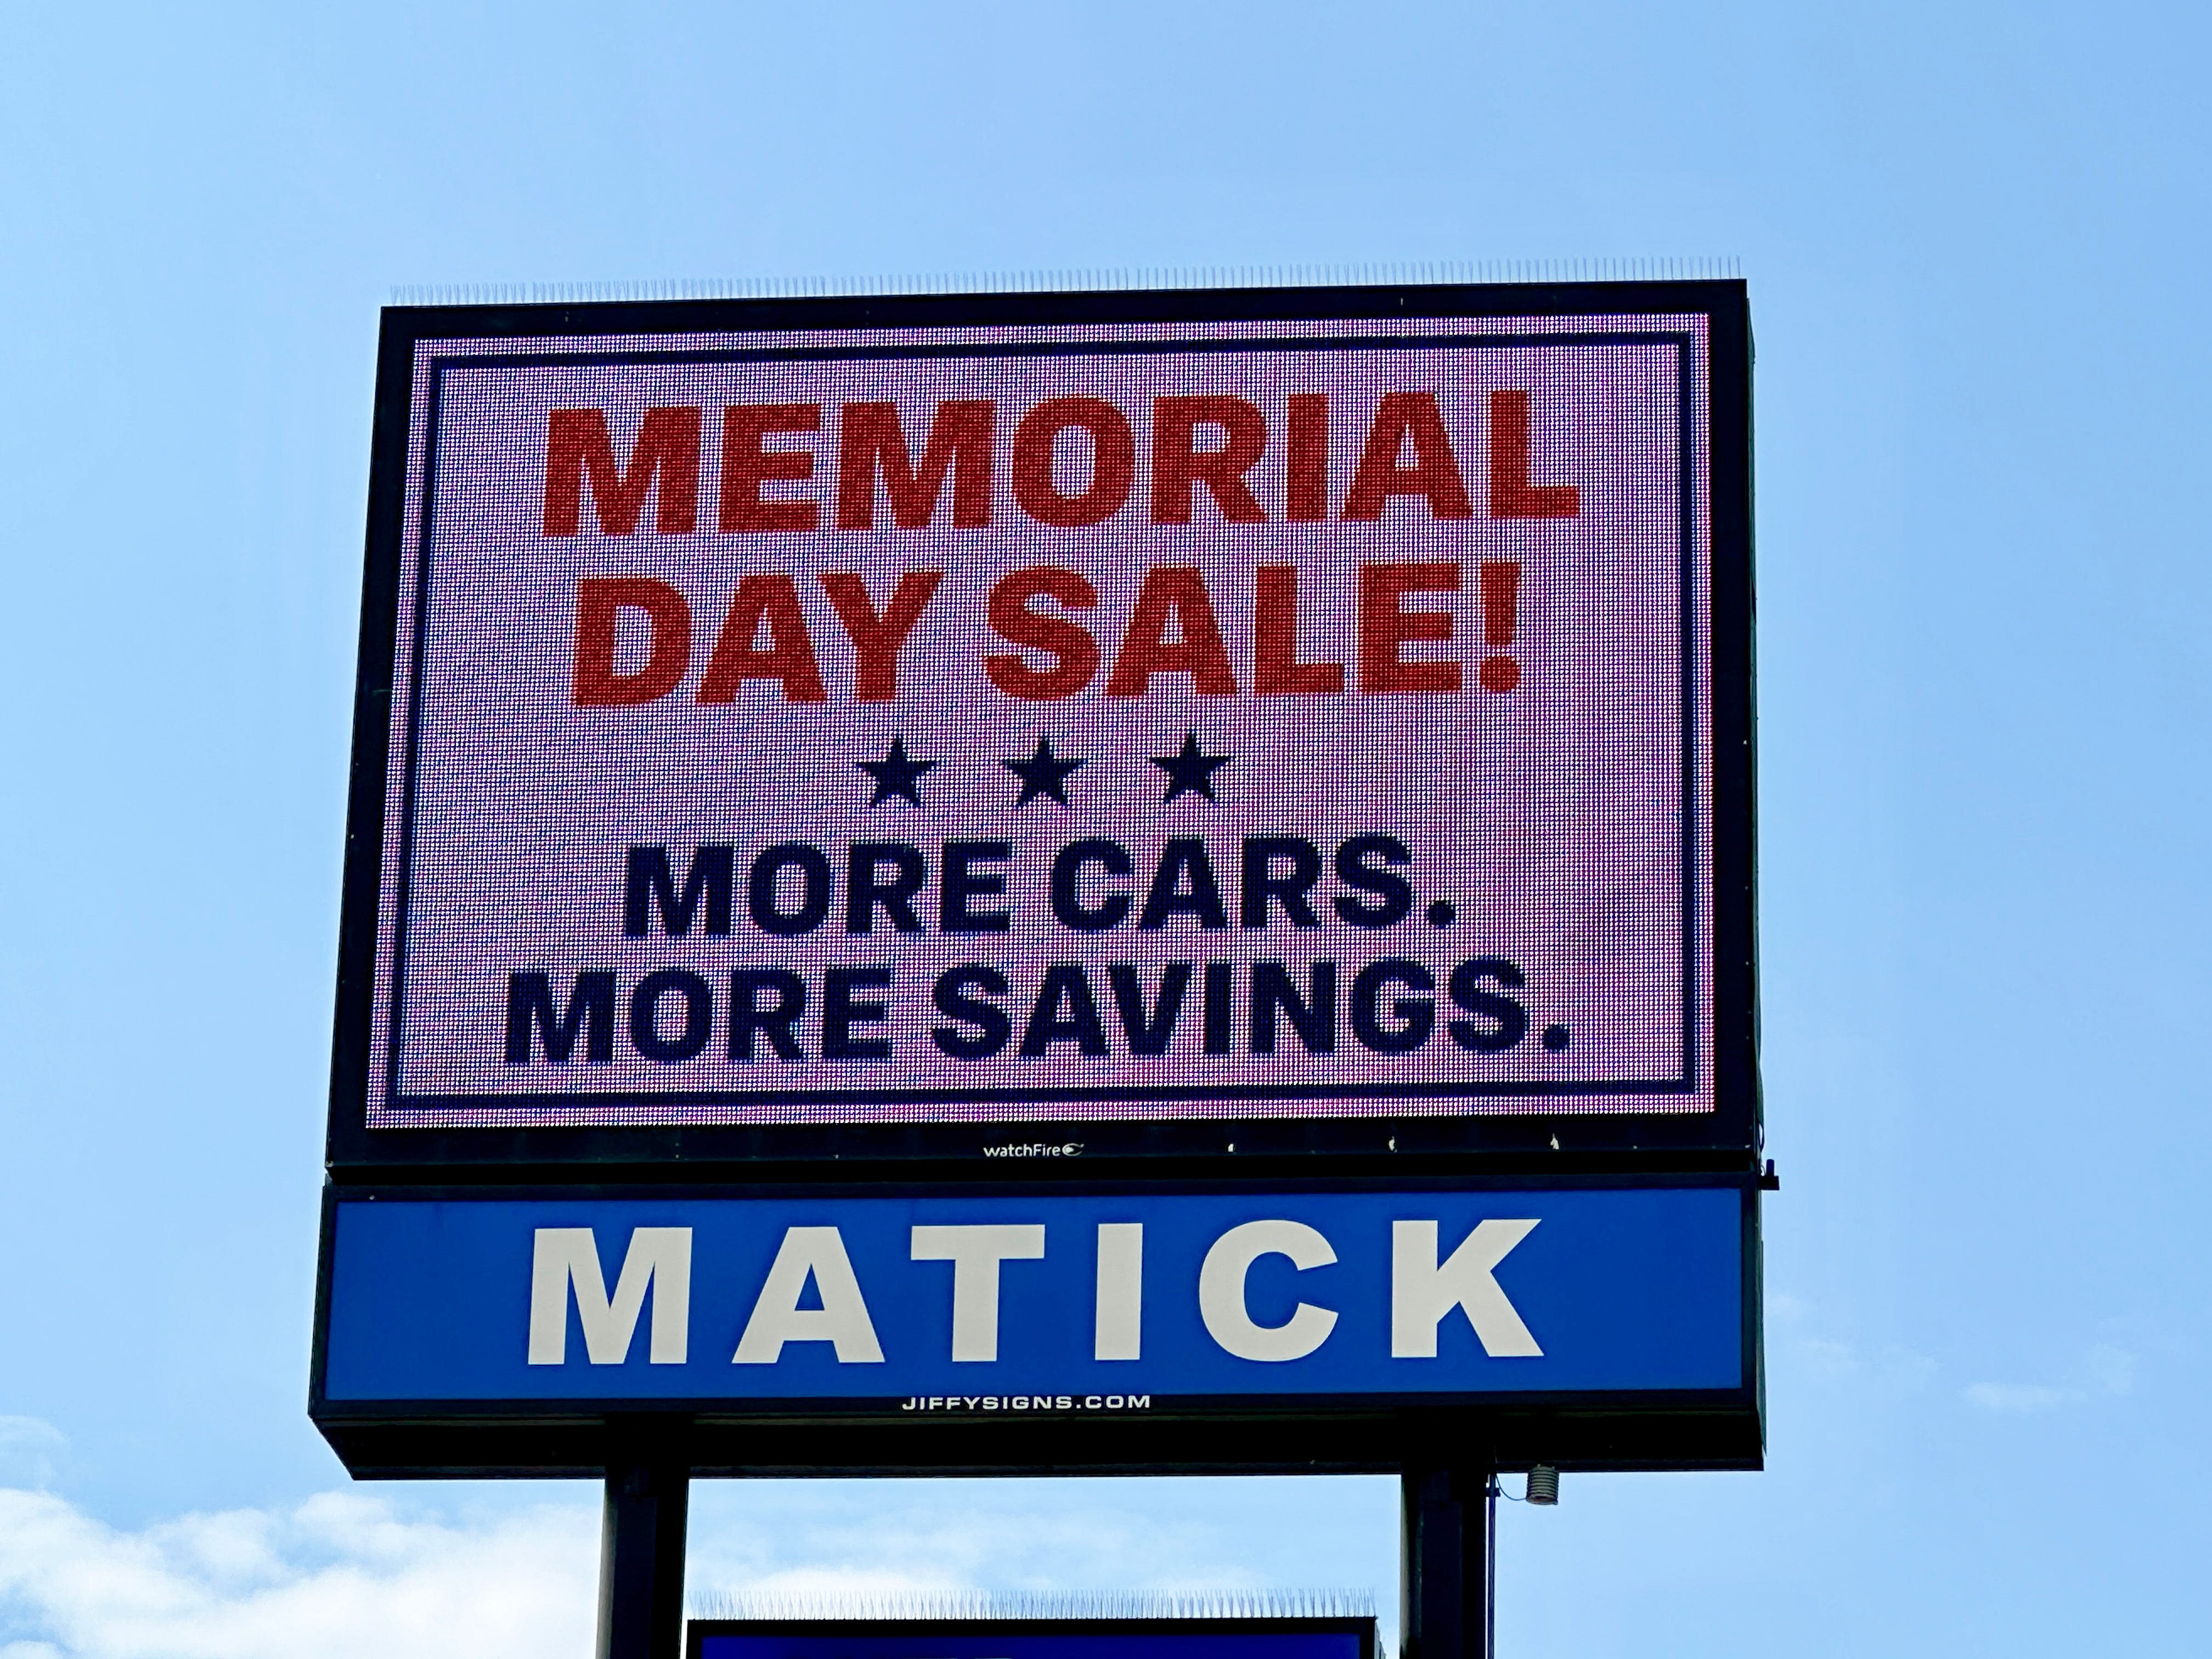 Memorial Day deals: High new car inventory could be good for buyers this weekend